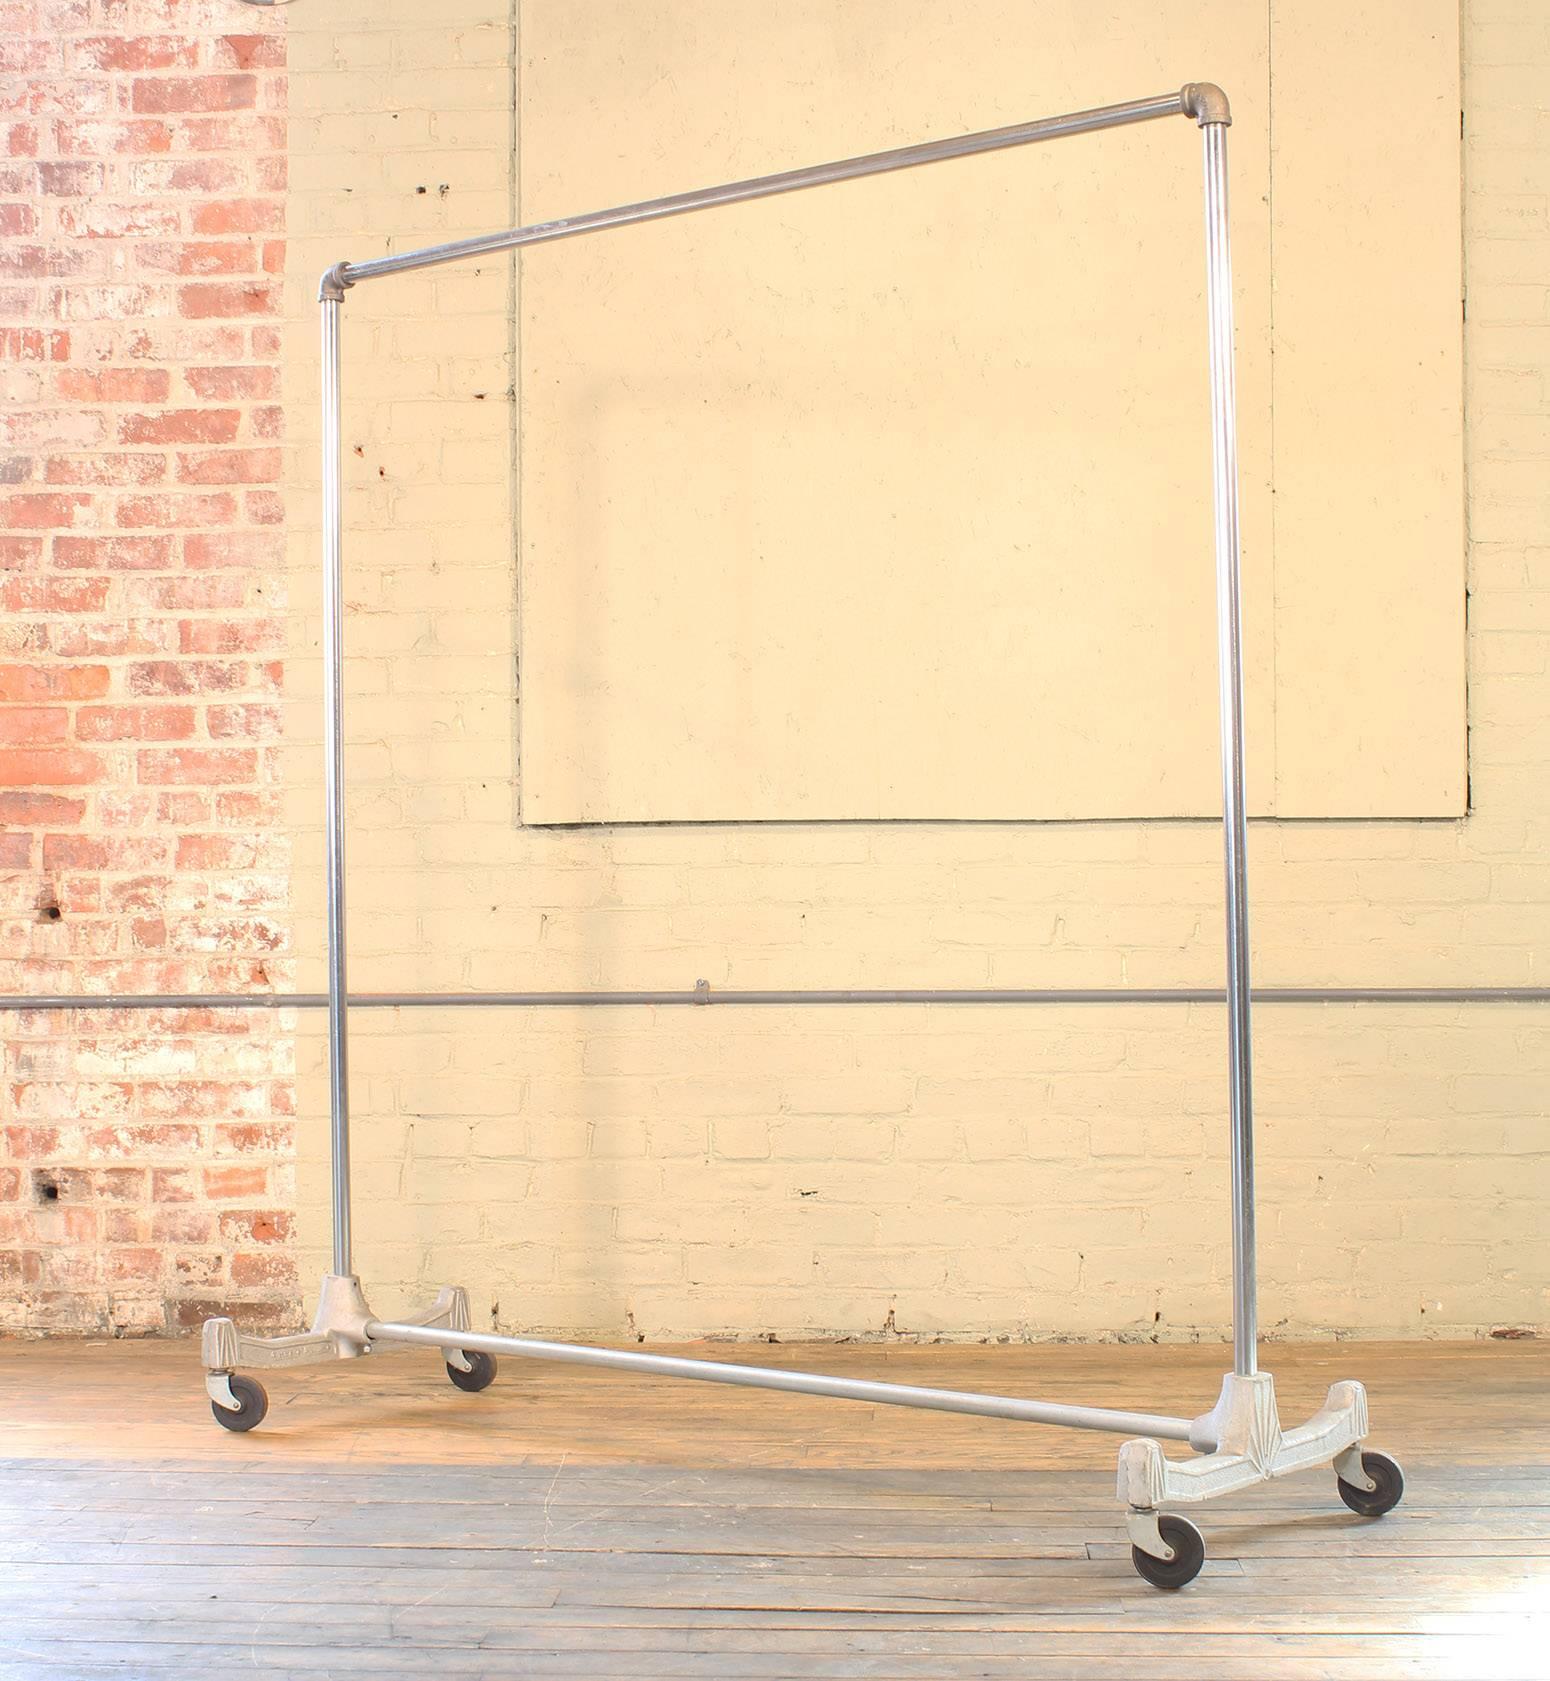 Vintage clothiers rack, rolling garment rack. Made from cast aluminium, steel and iron. Reads 